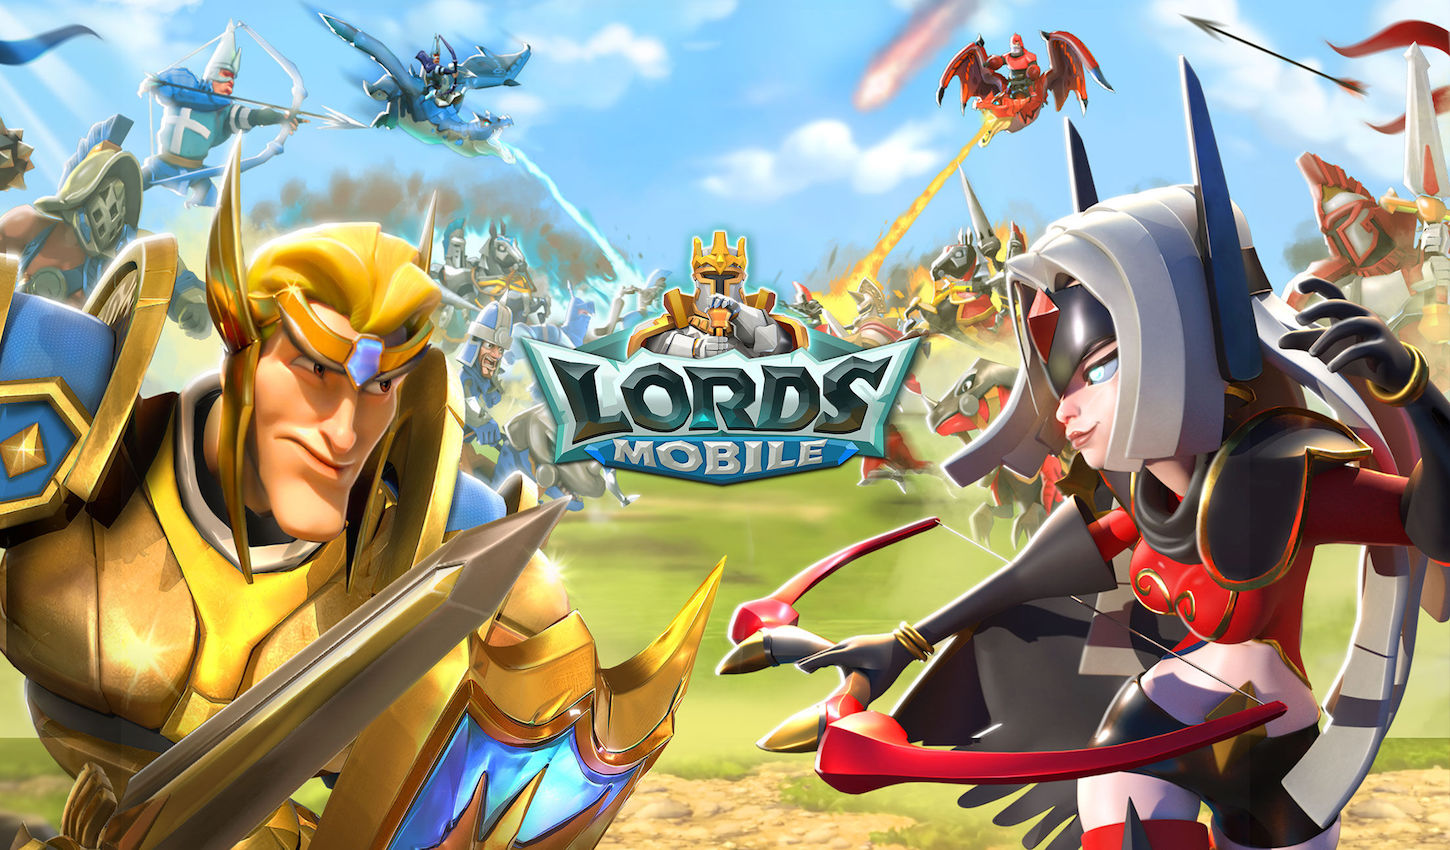 Lords Mobile Revenue Doubled to $90 Million in January Thanks to New Gold Pass main image feature